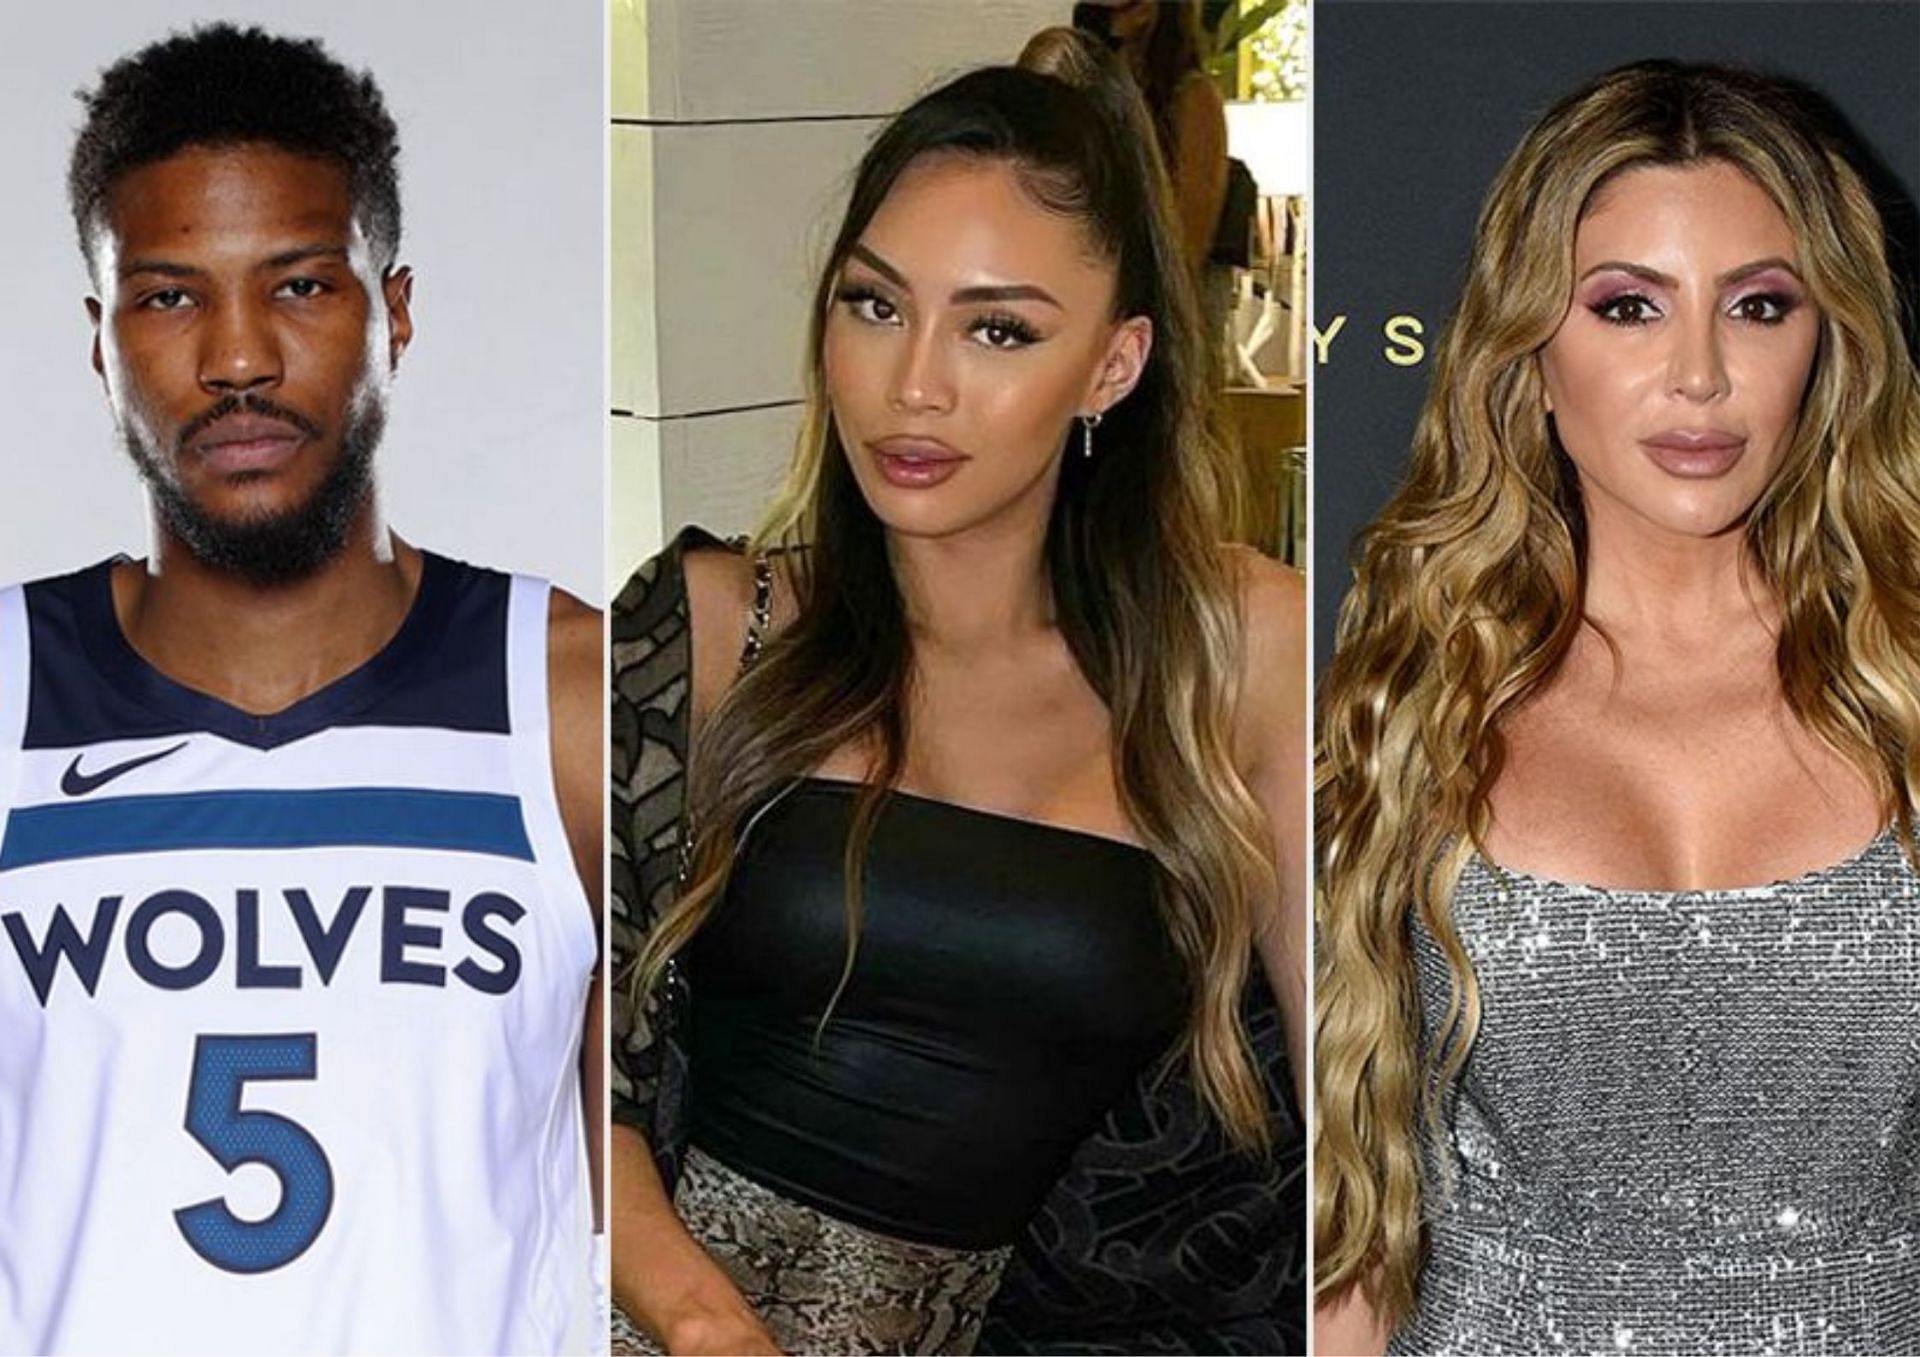 Malik Beasley, Larsa Pippen and Montana Yao were involved in an ugly spat in 2020 because of Beasley